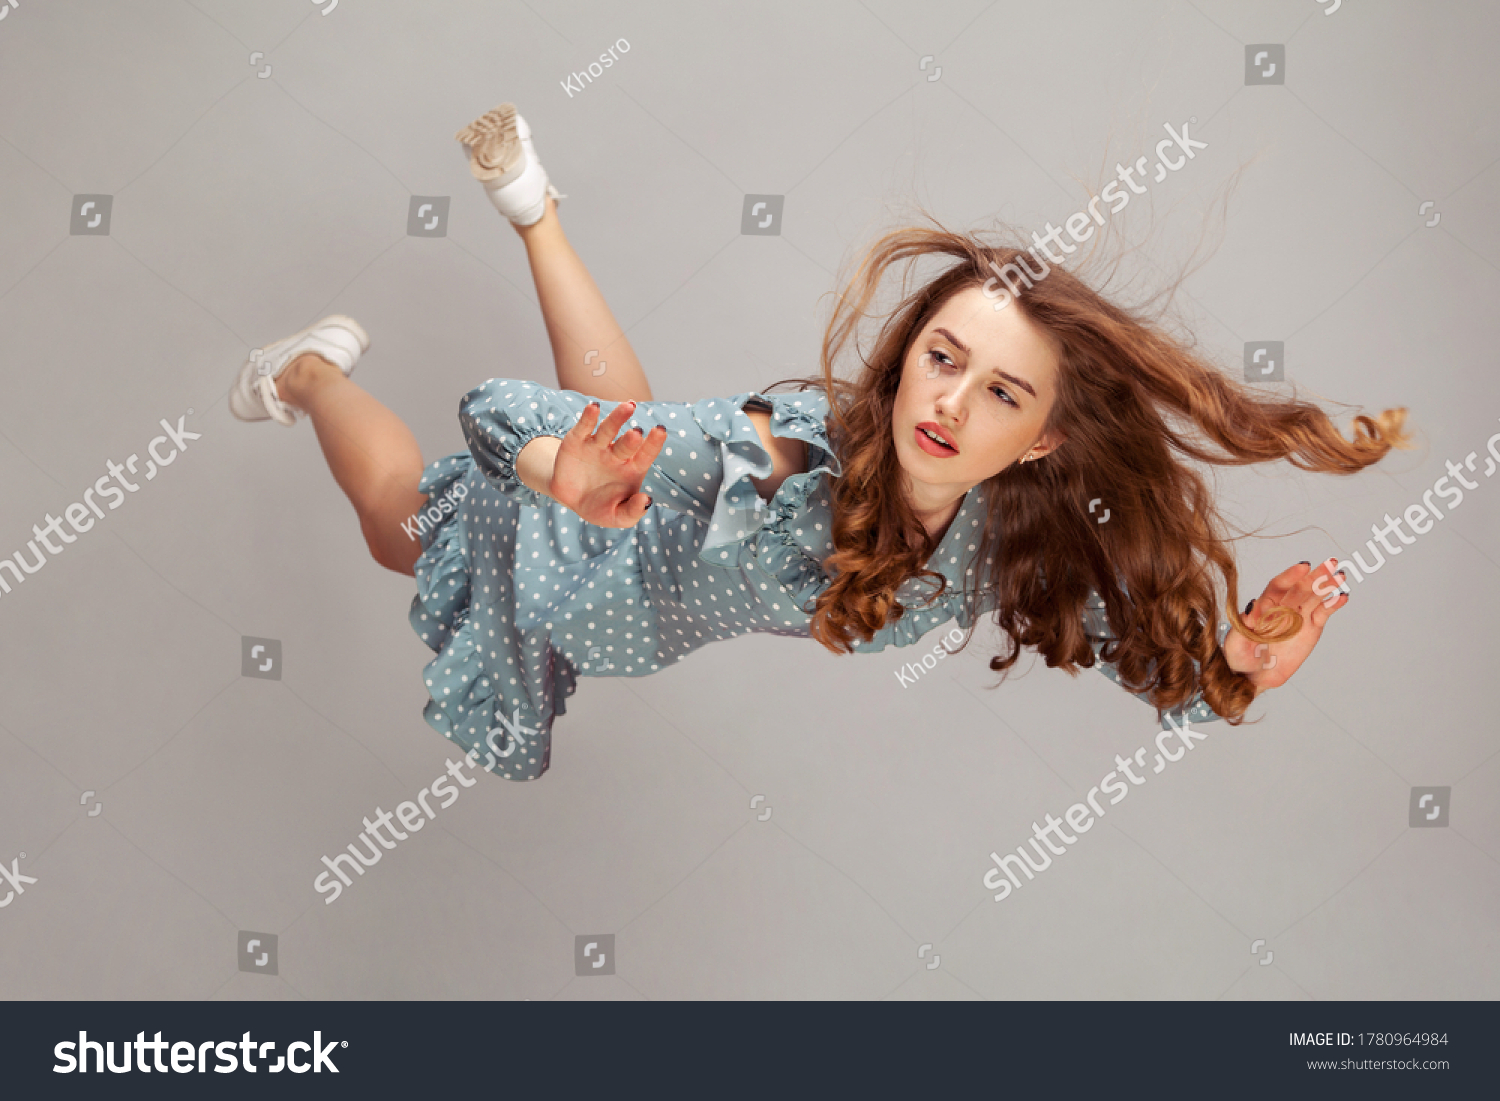 Beautiful girl levitating in mid-air, falling down and her hair messed up soaring from wind, model flying hovering with dreamy peaceful expression. indoor studio shot isolated on gray background #1780964984